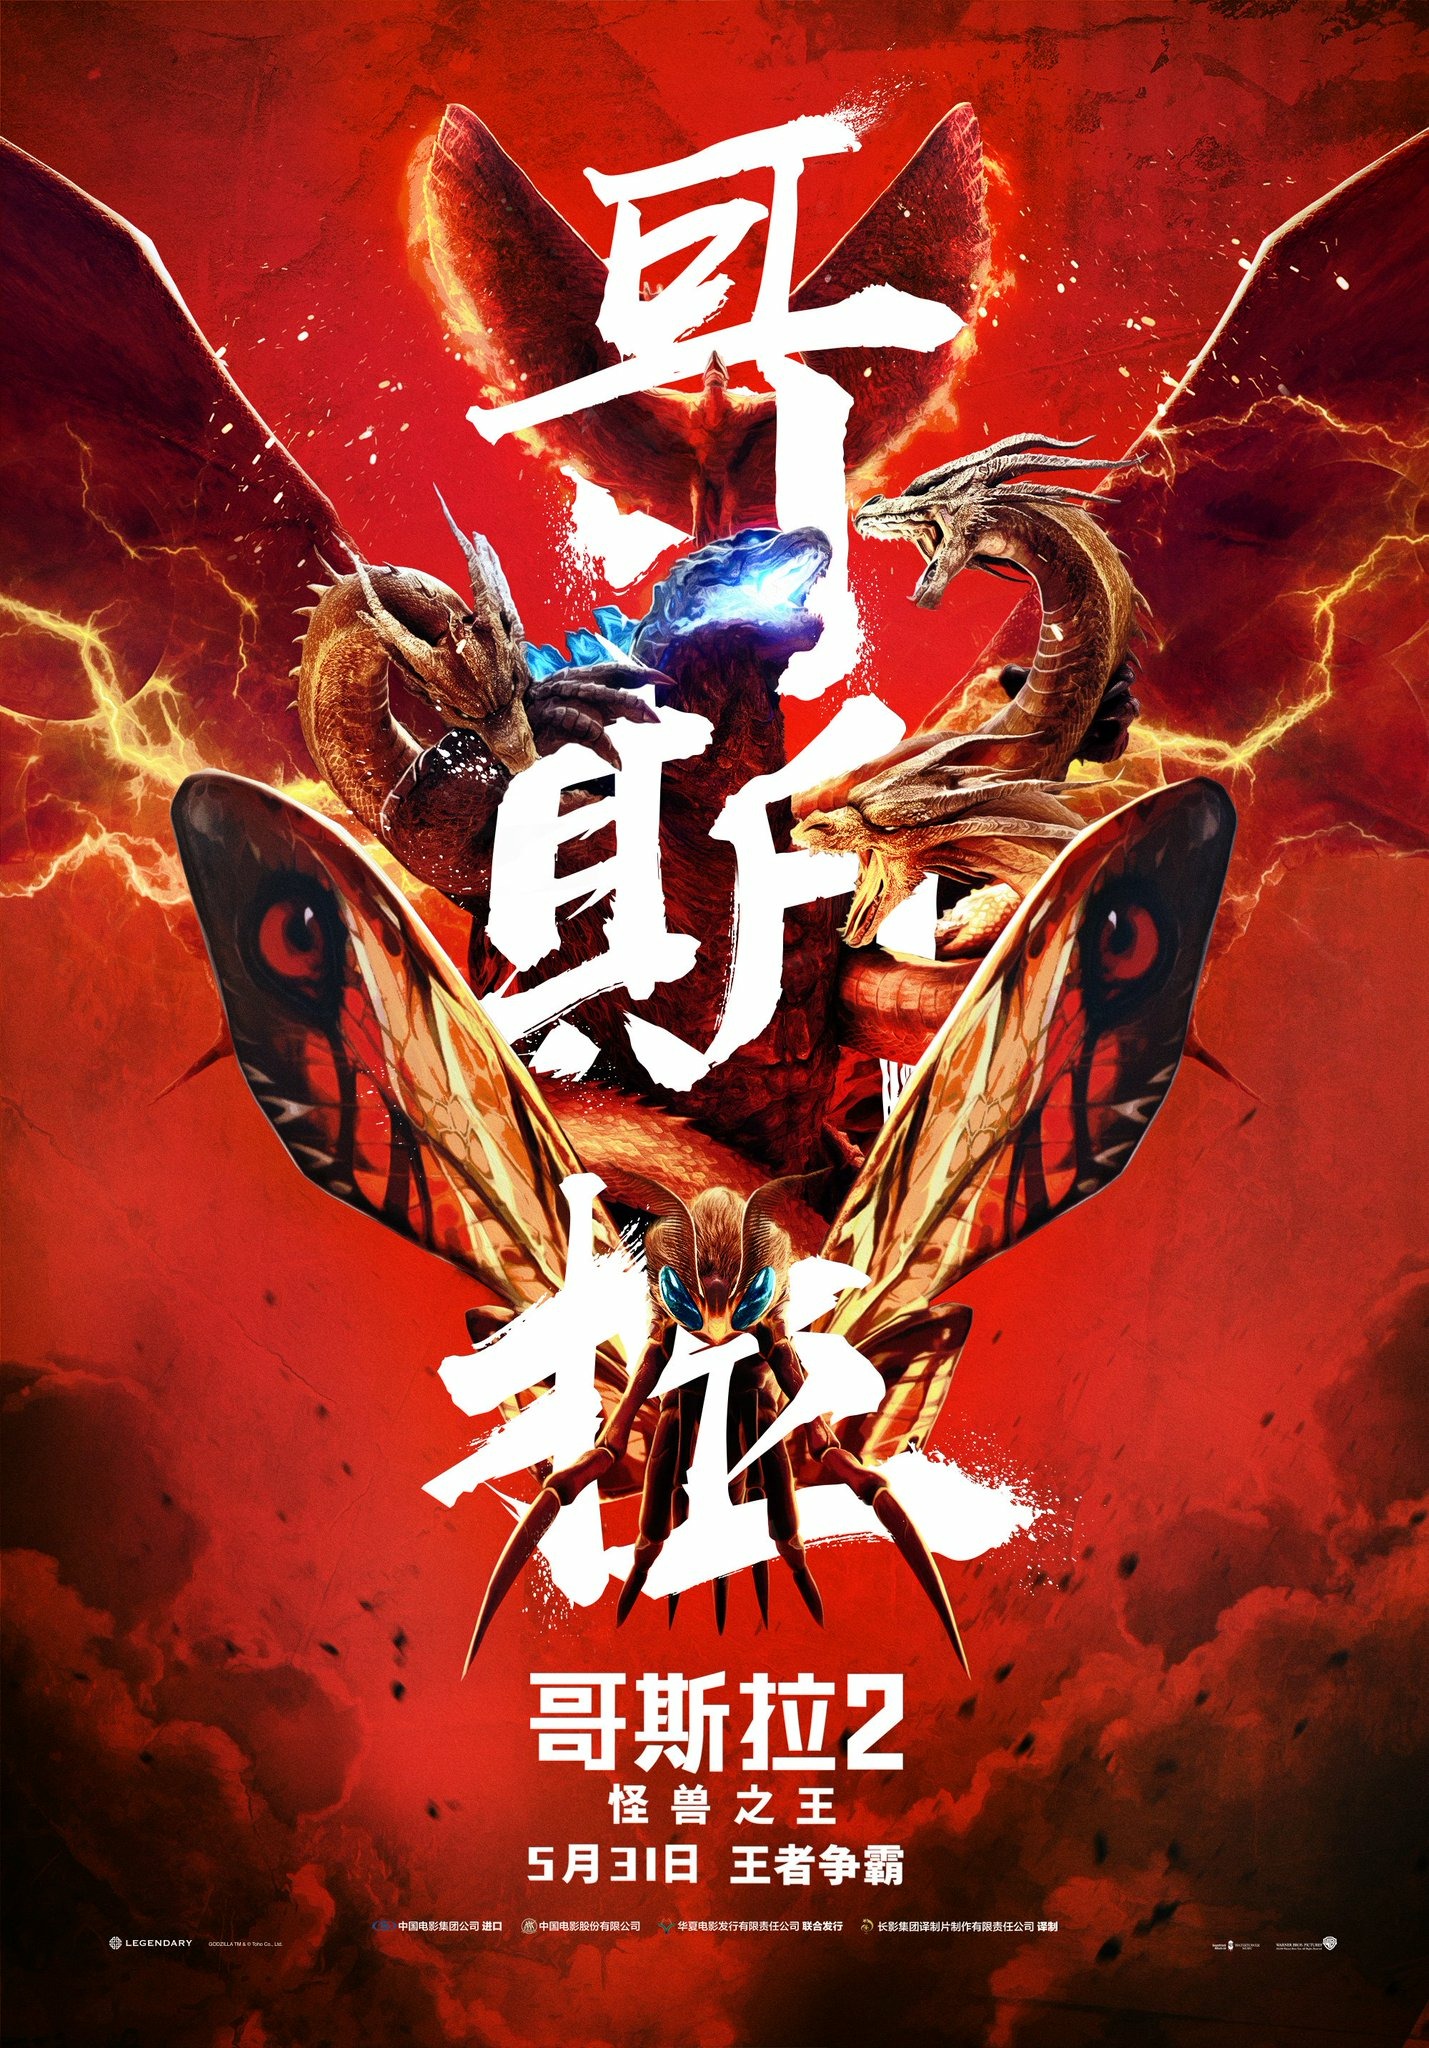 Mega Sized Movie Poster Image for Godzilla: King of the Monsters (#23 of 27)